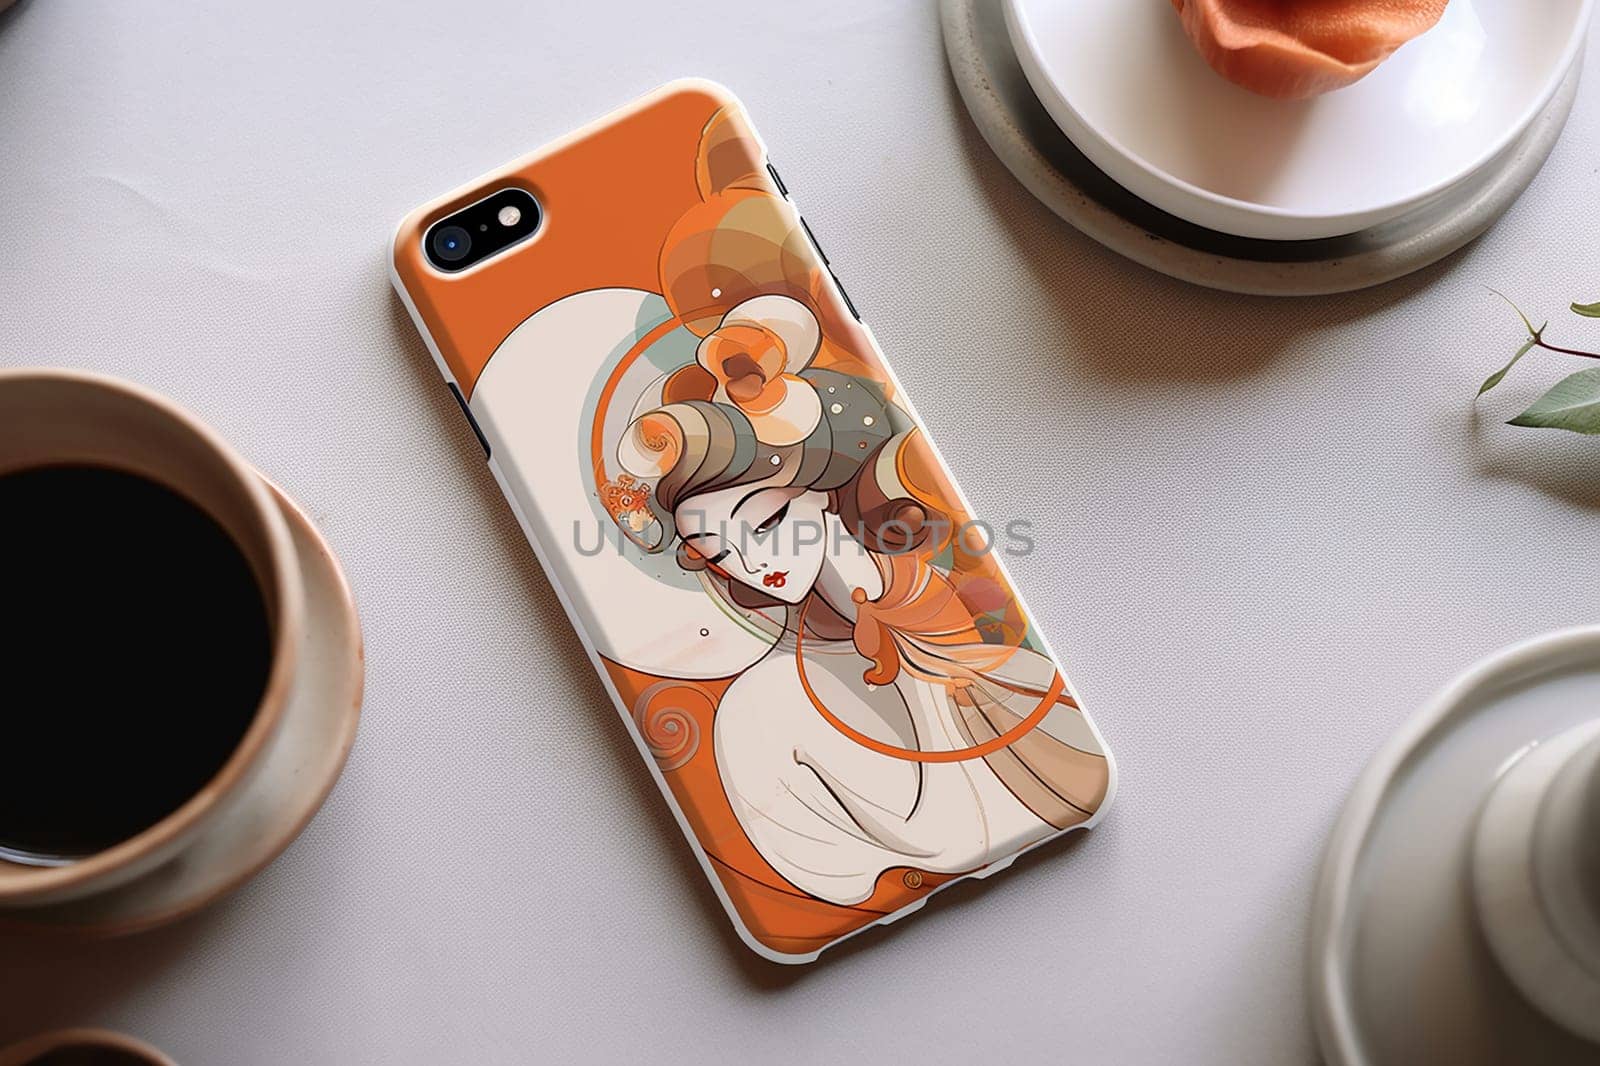 Illustrative phone case featuring a stylized woman with a coffee cup. by Hype2art